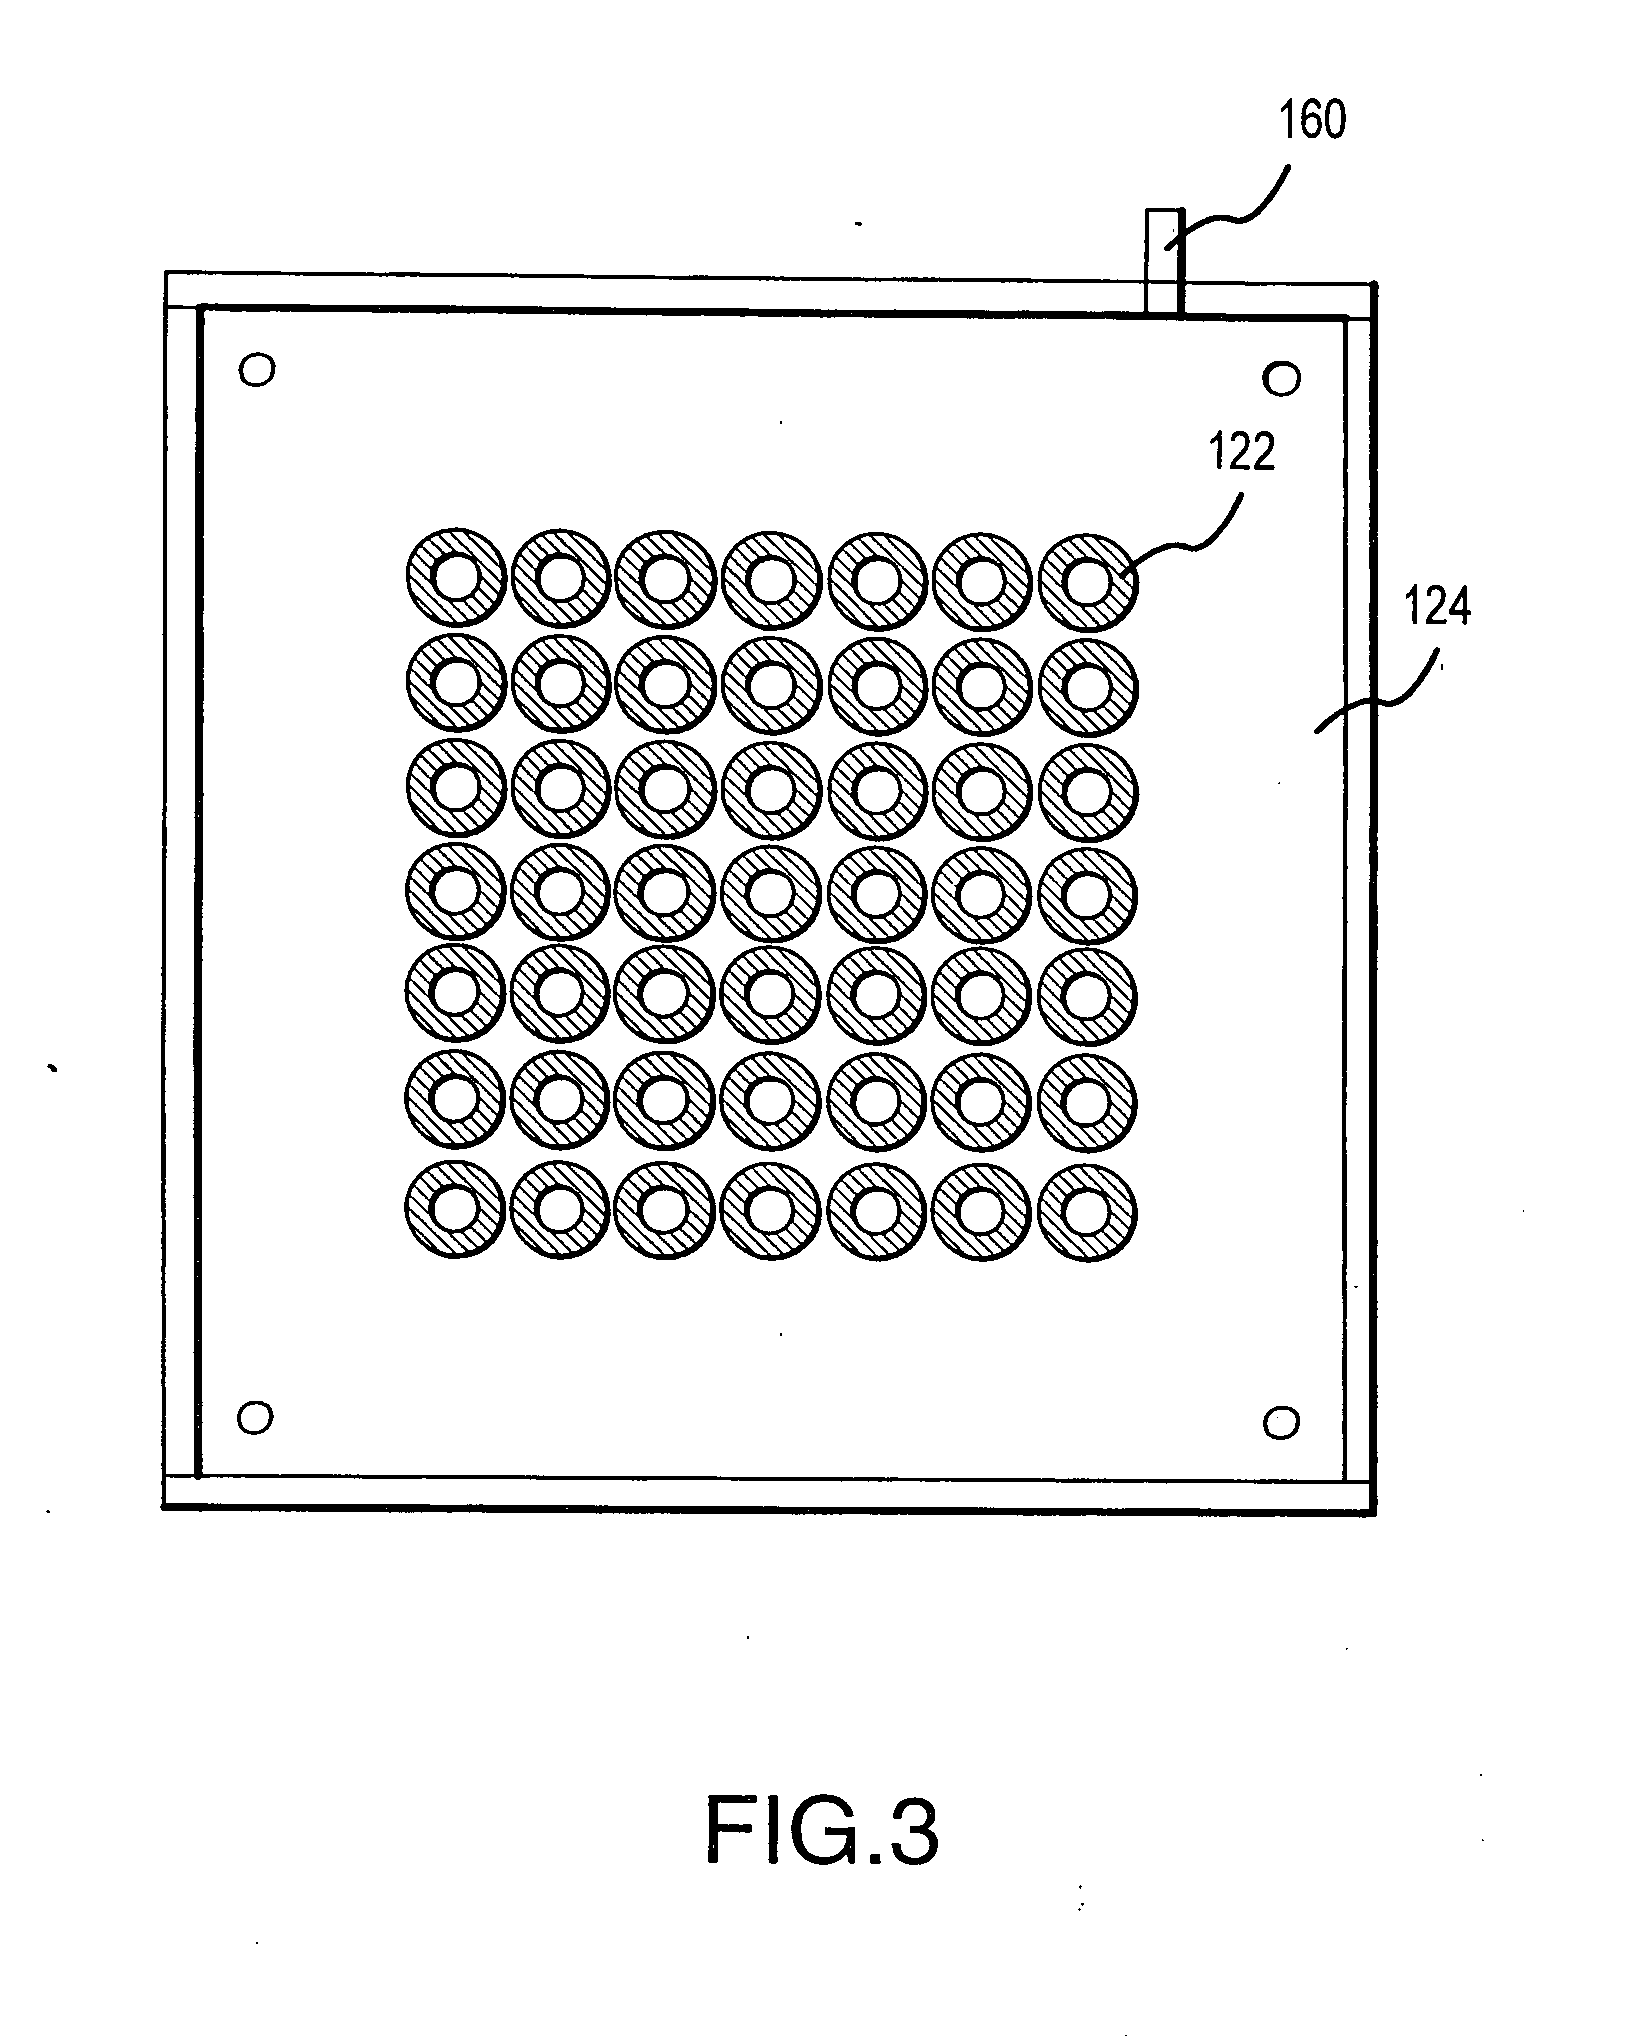 Cathodoluminescent phosphor powders, methods for making phosphor powders and devices incorporating same